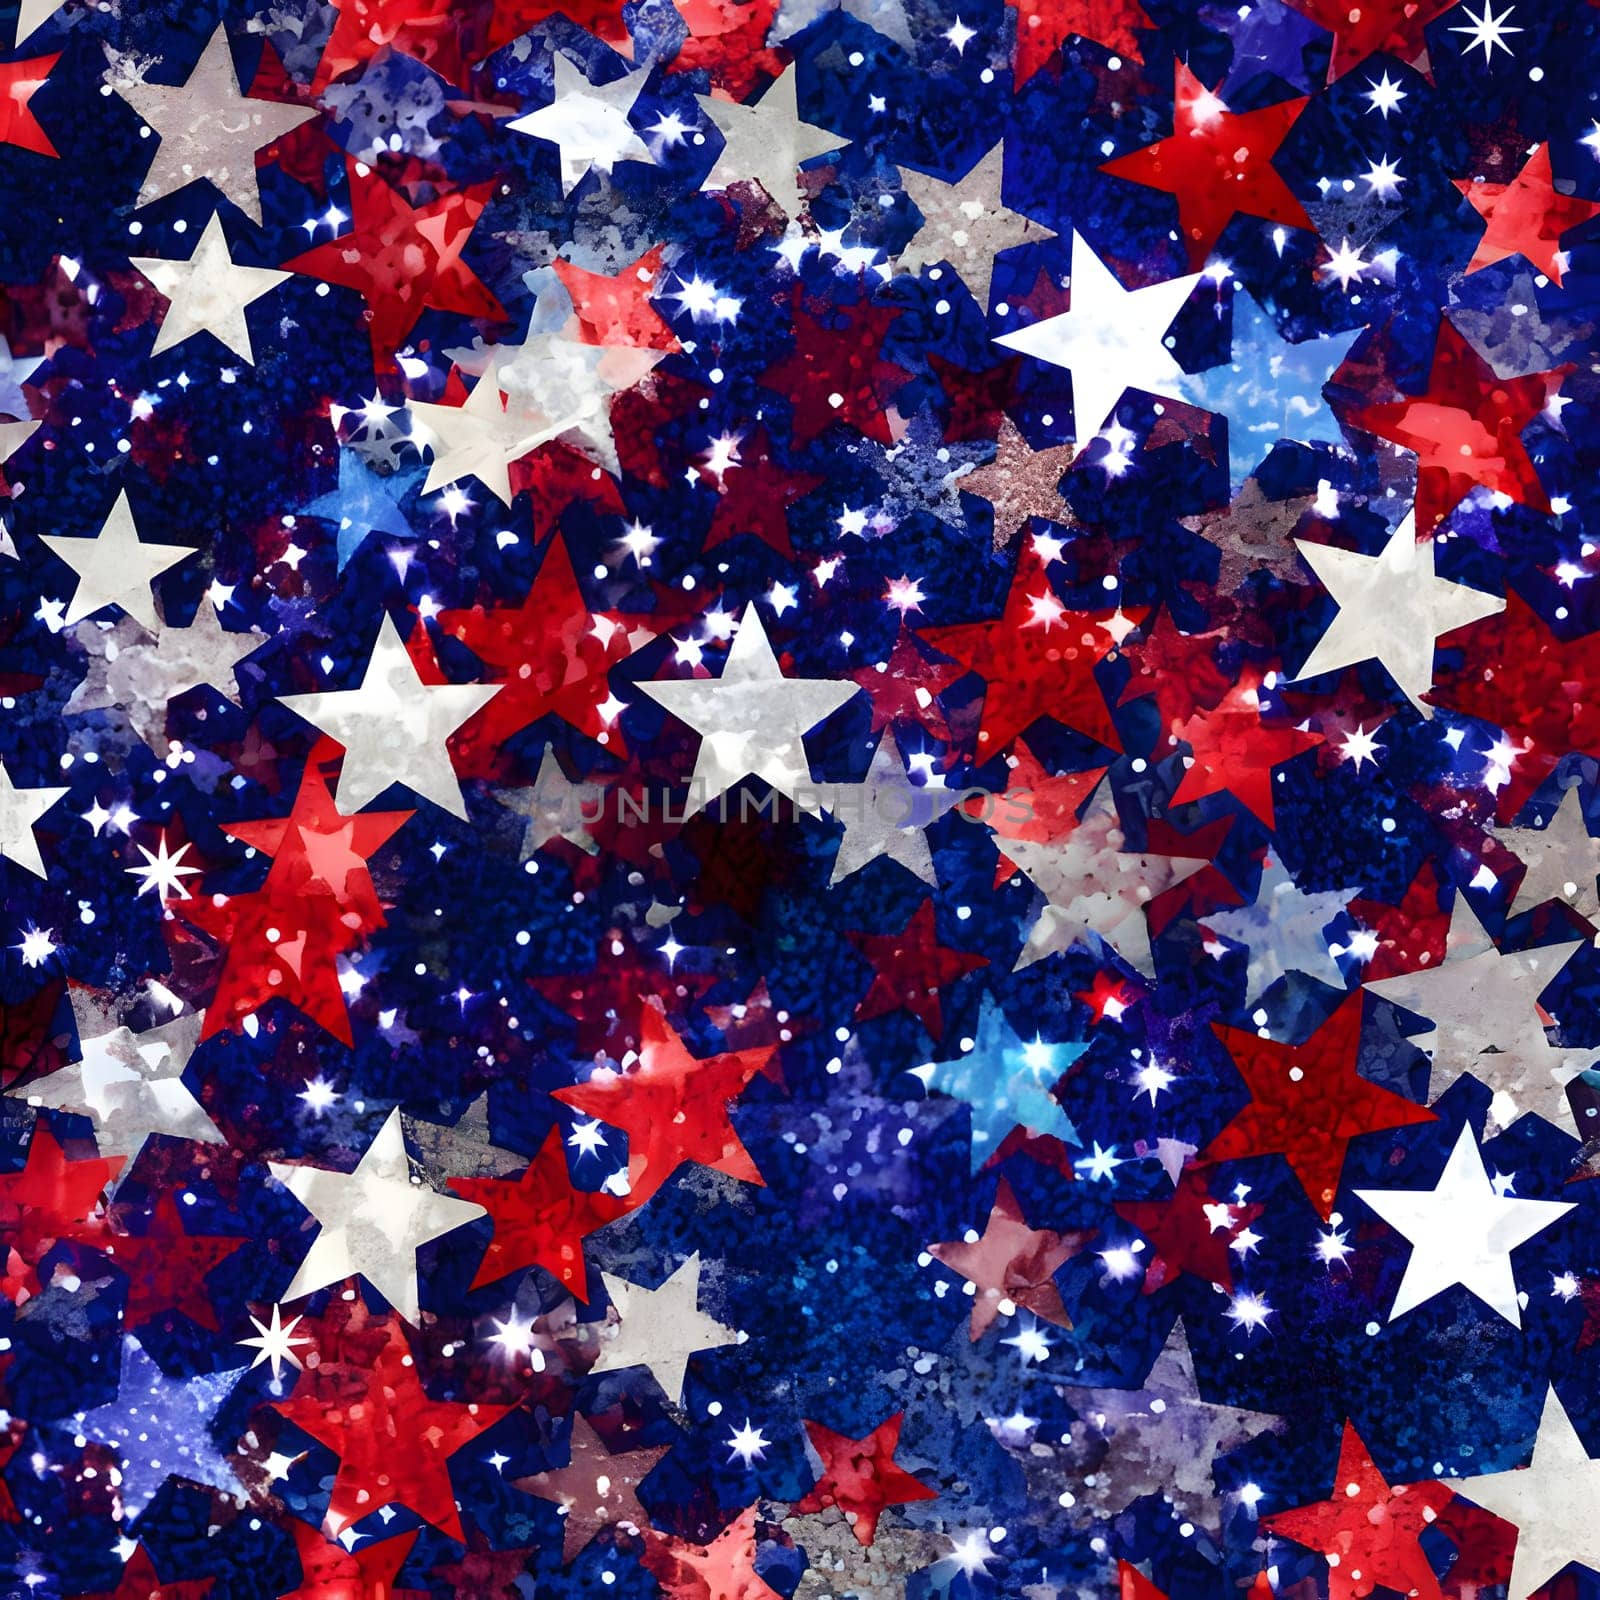 Patterns and banners backgrounds: Seamless pattern with american stars on a dark blue background